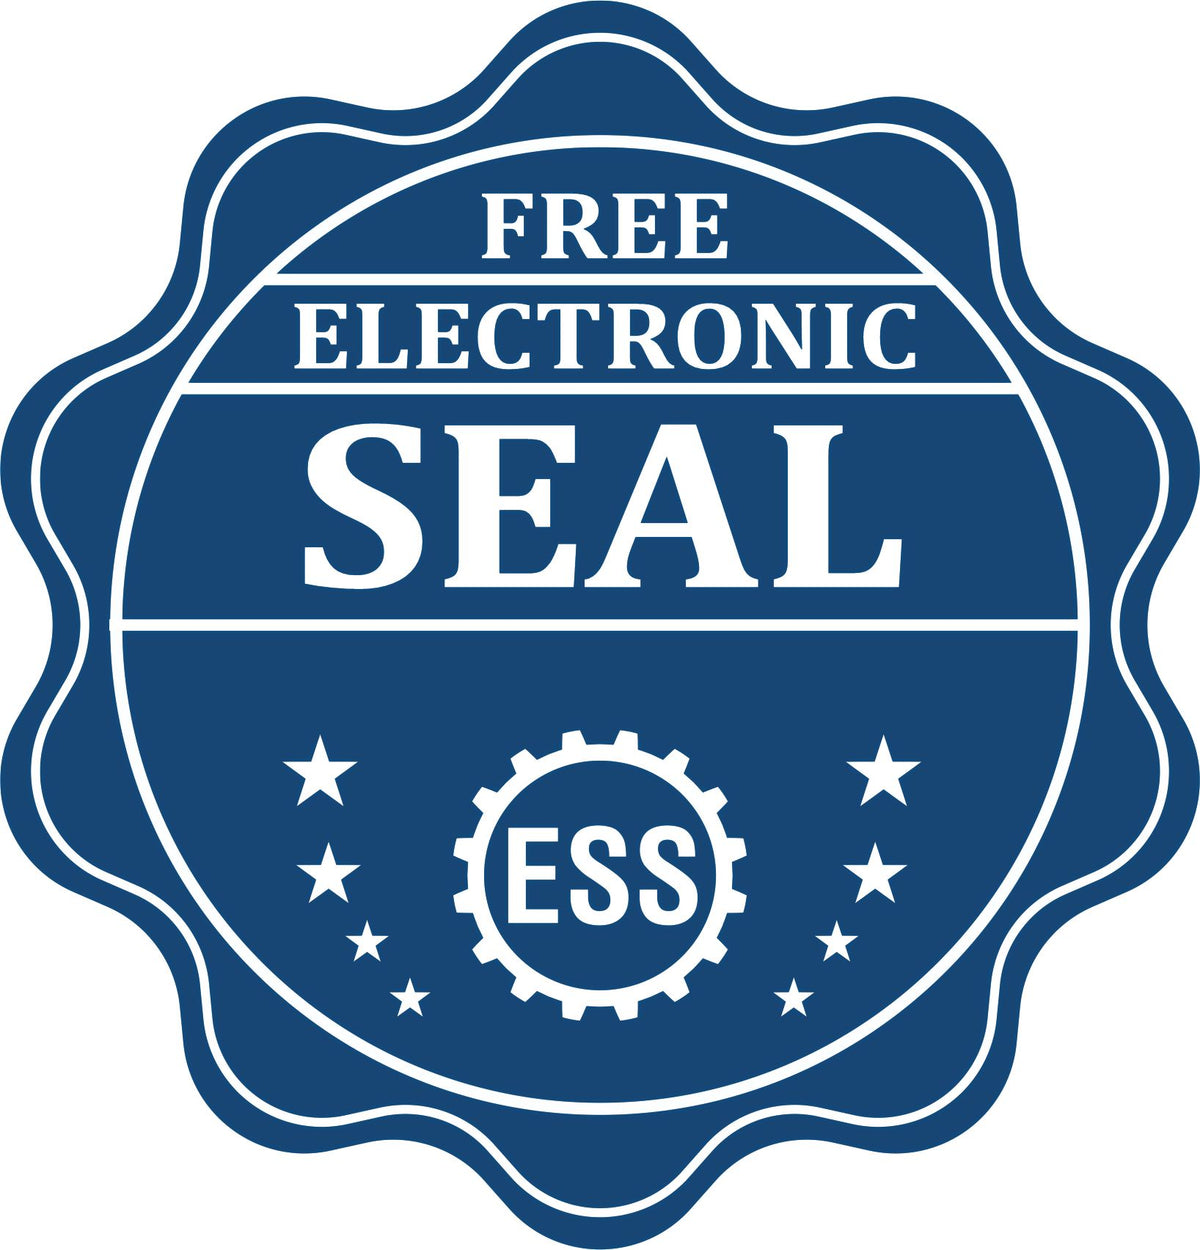 A badge showing a free electronic seal for the Gift District of Columbia Landscape Architect Seal with stars and the ESS gear on the emblem.